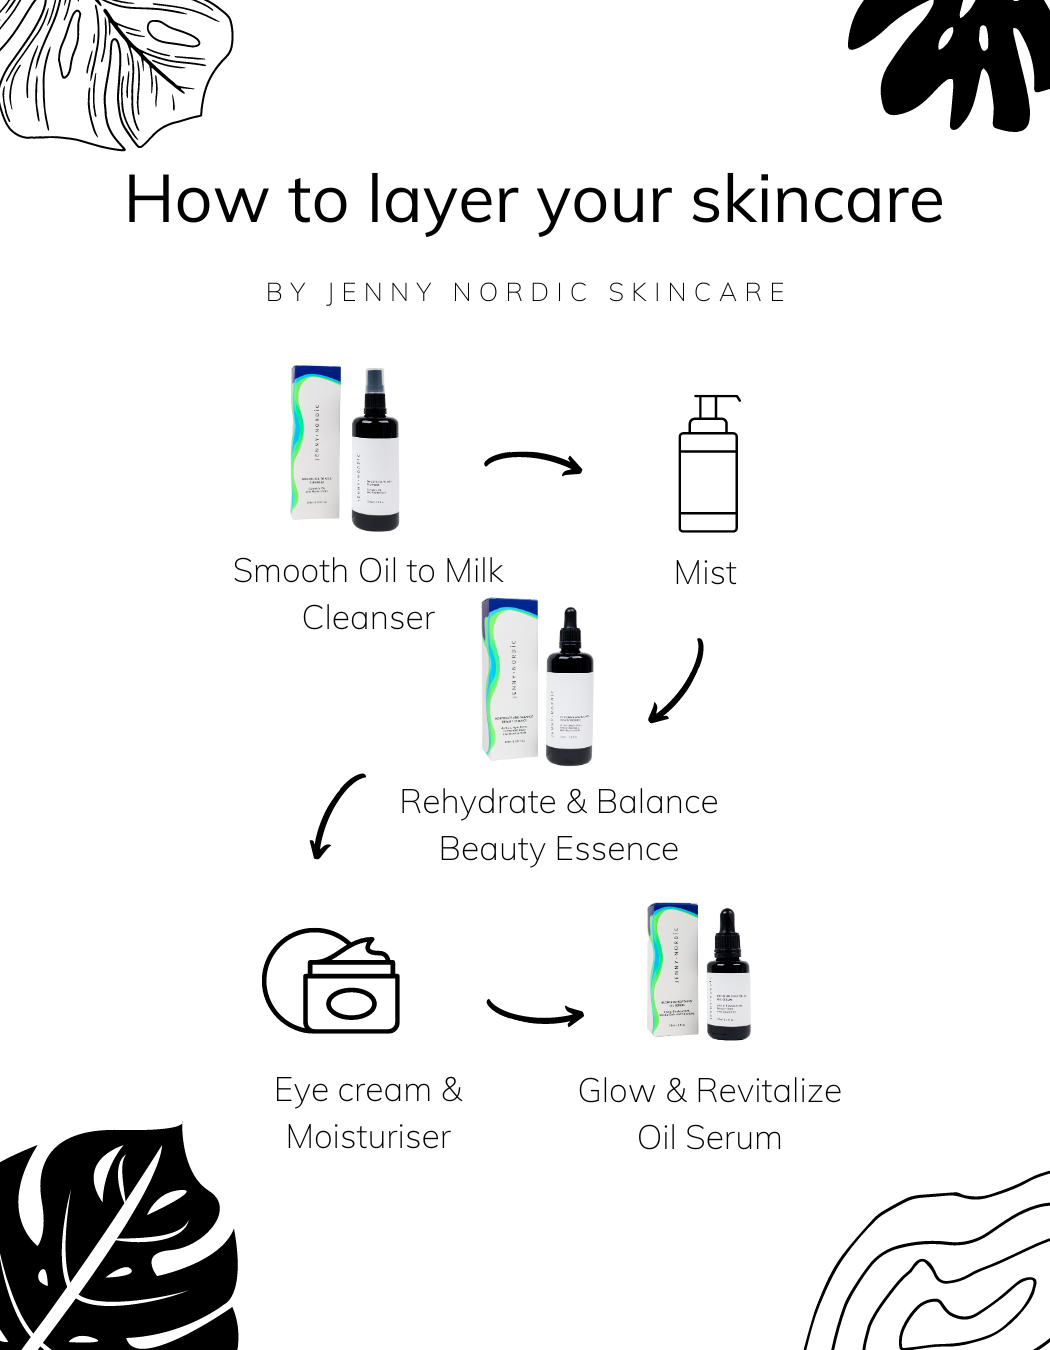 How to layer your skincare correctly